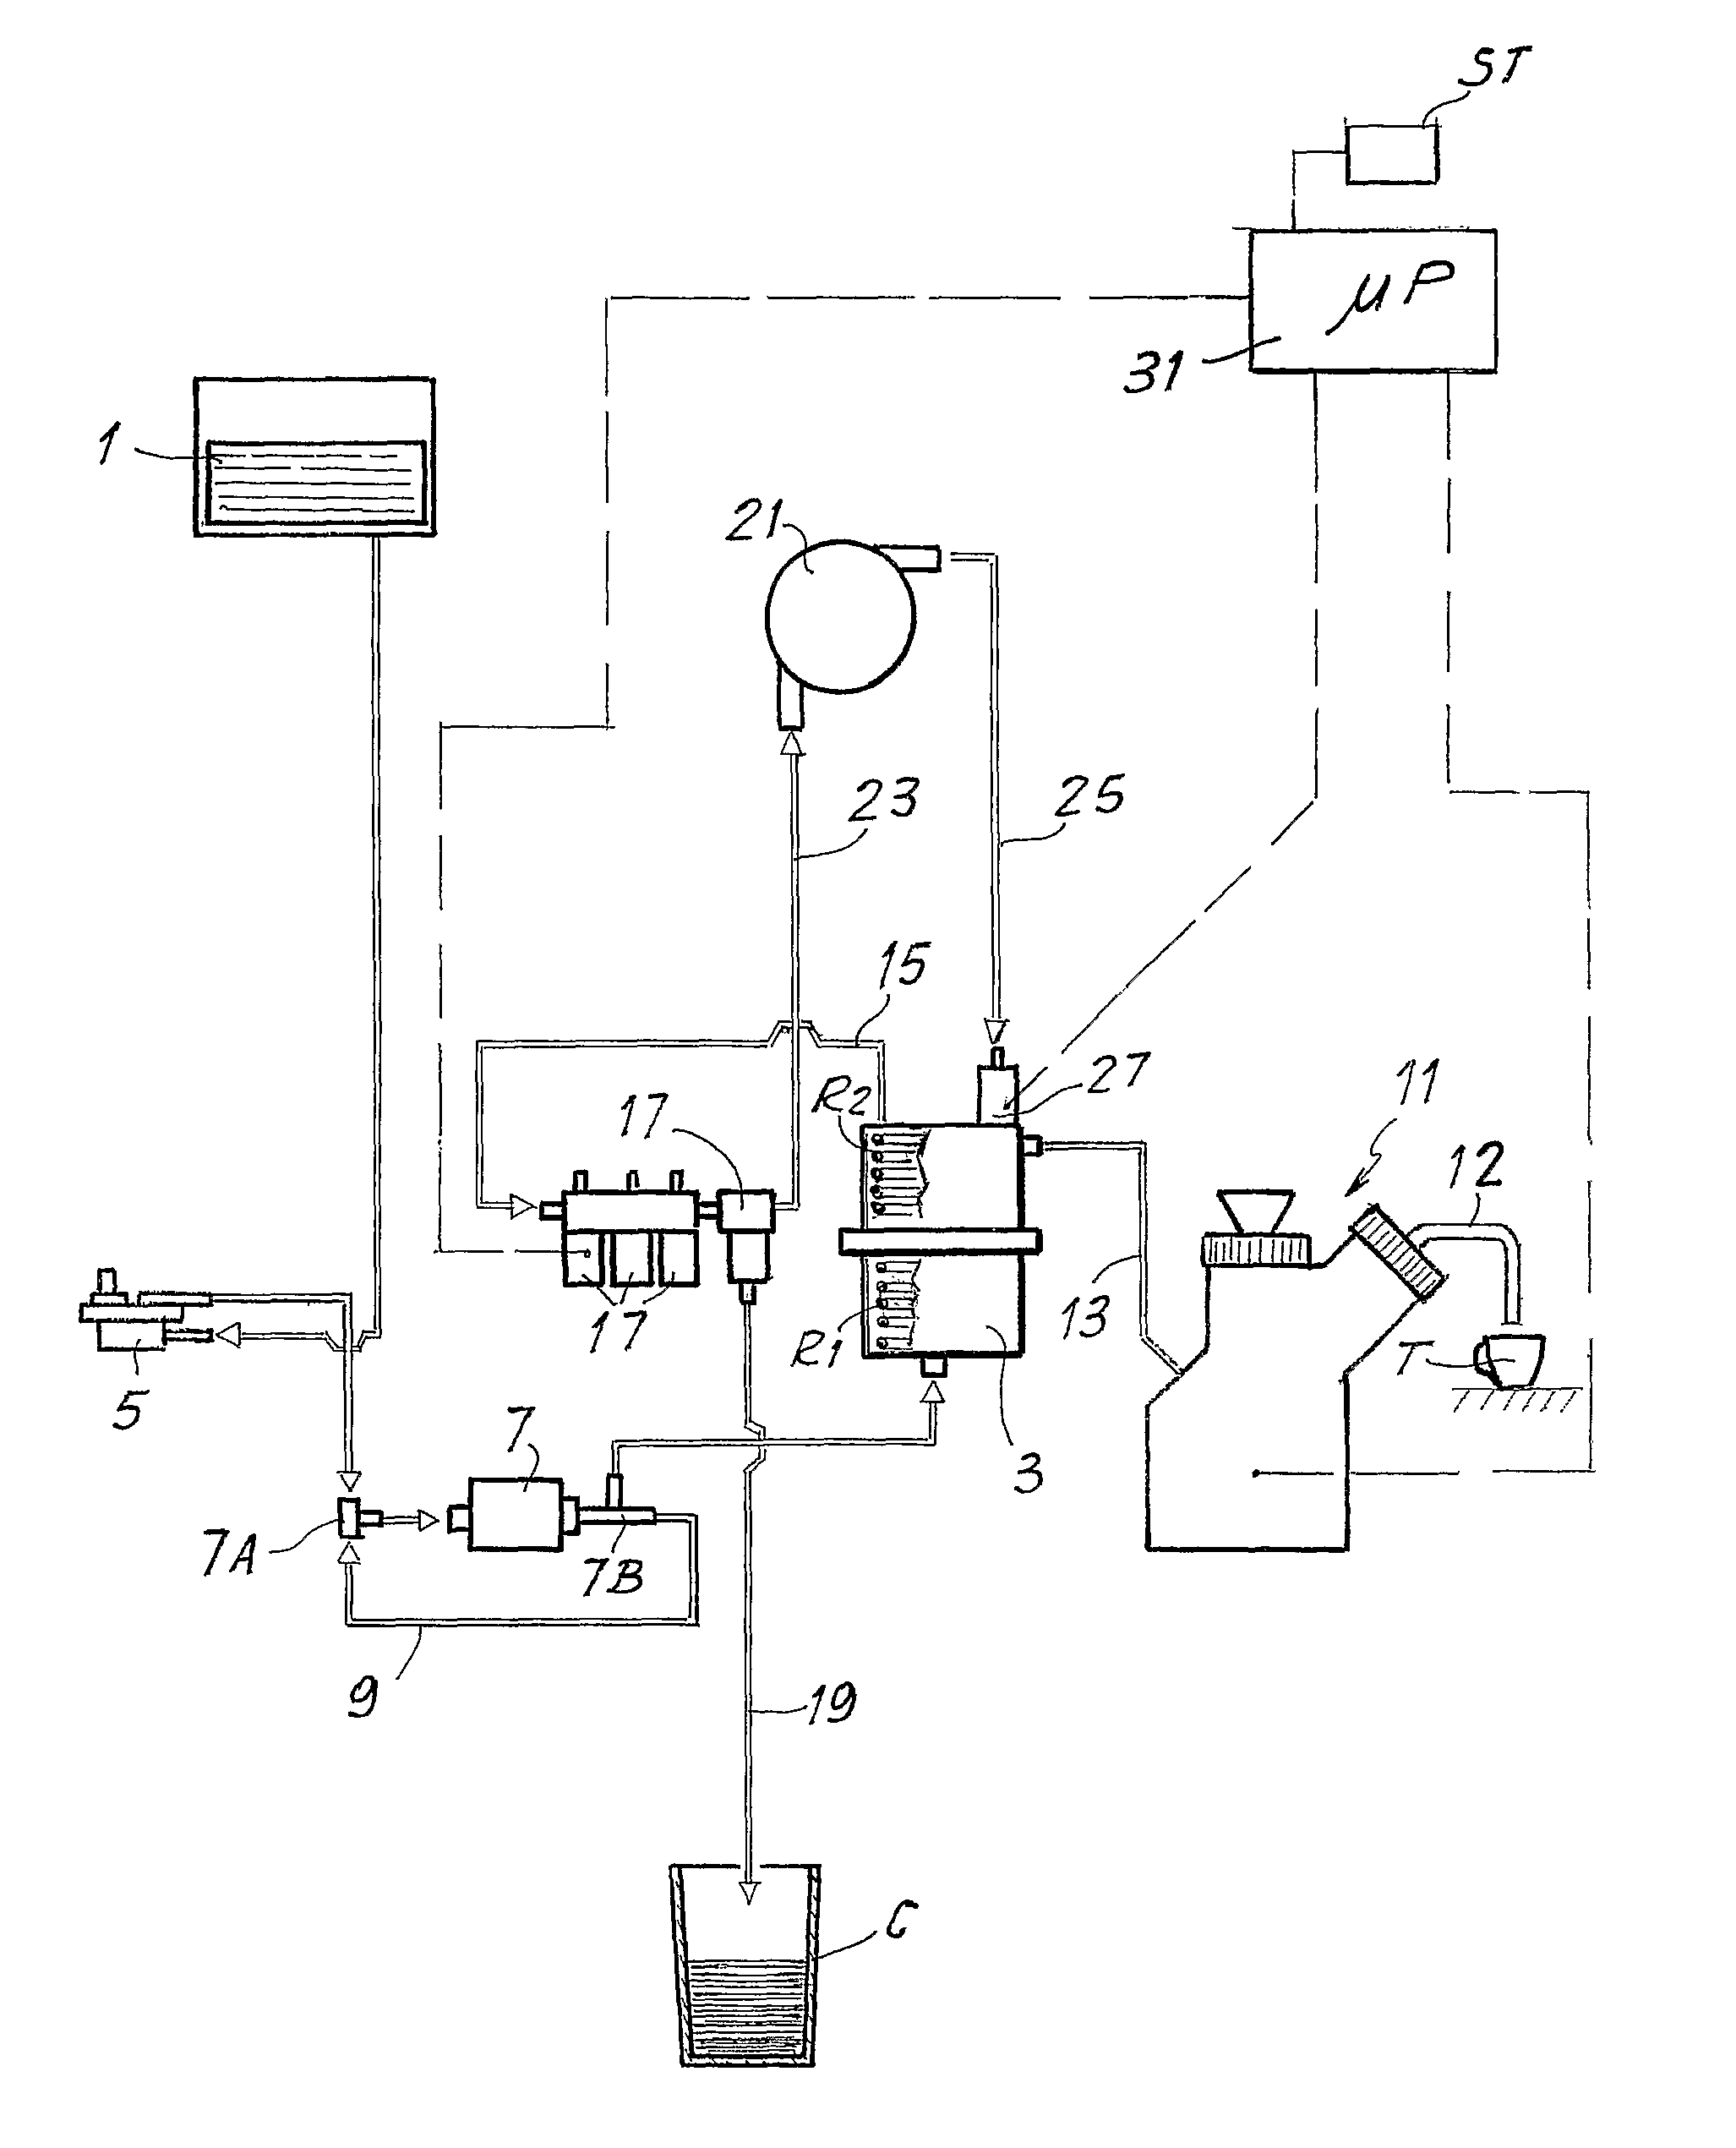 Machine to produce coffee or the like and relative method